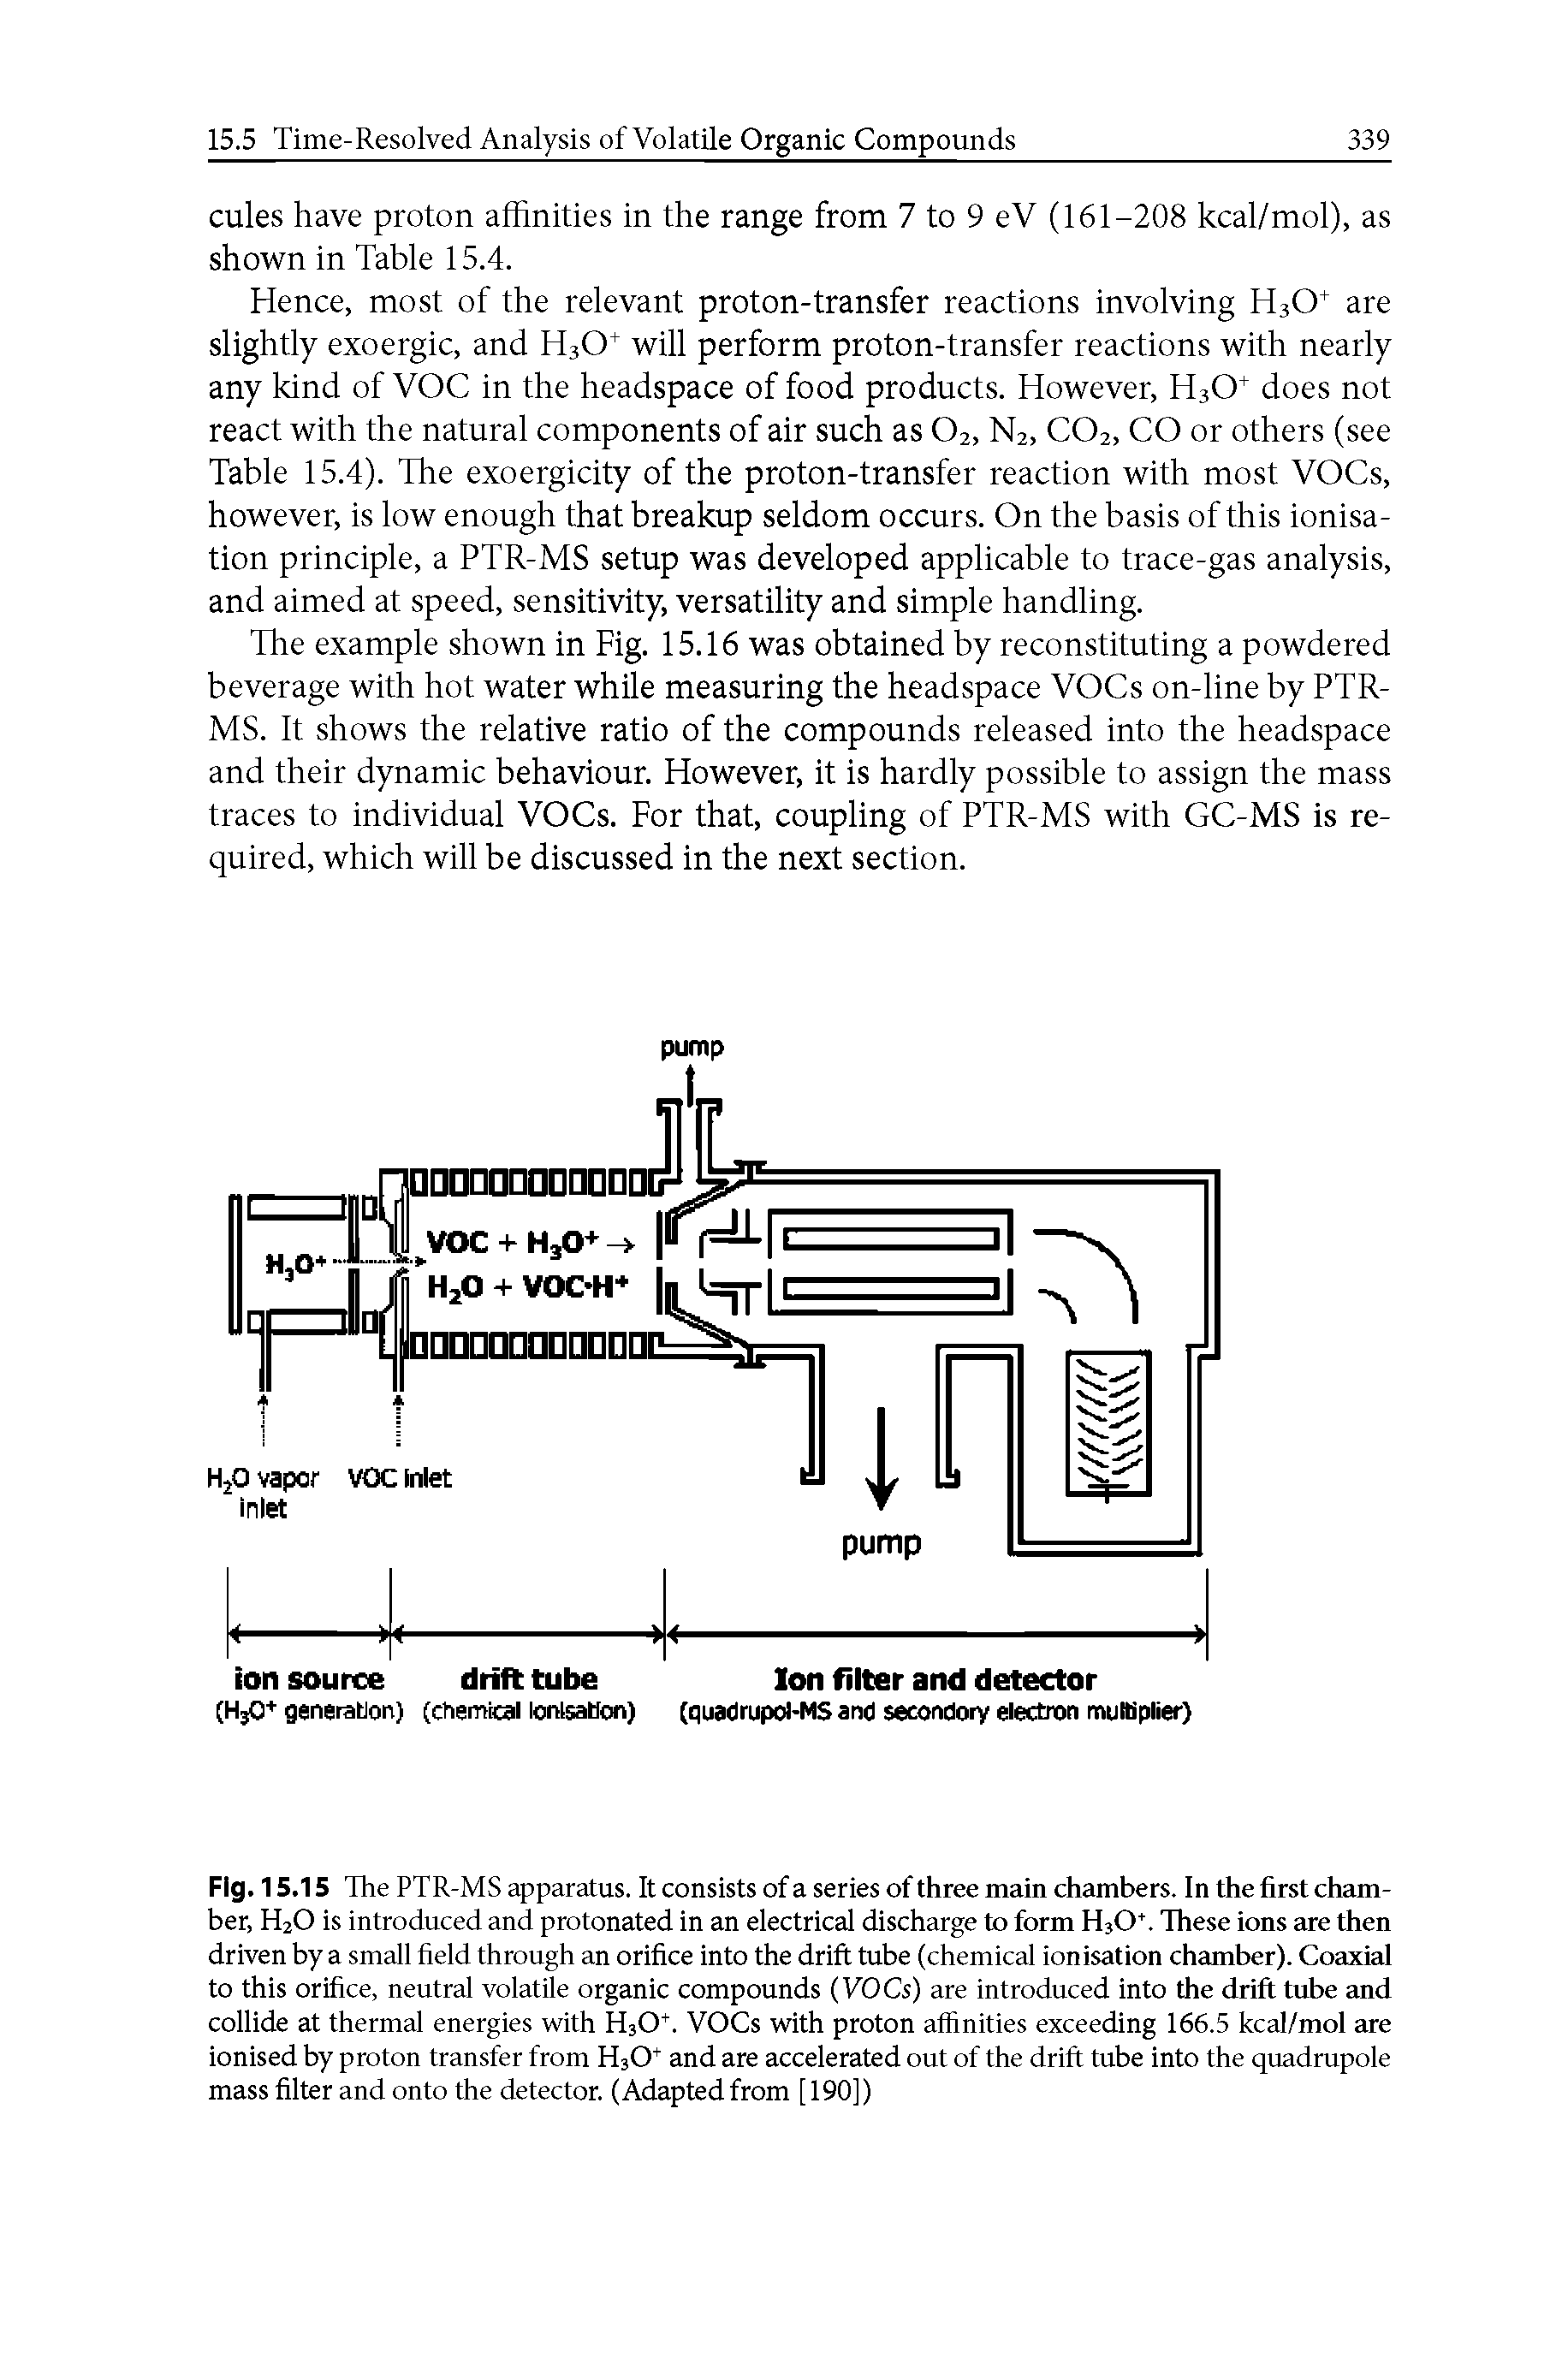 Fig. 15.15 The PTR-MS apparatus. It consists of a series of three main chambers. In the first chamber, H2O is introduced and protonated in an electrical discharge to form H3O. These ions are then driven by a small field through an orifice into the drift tube (chemical ionisation chamber). Coaxial to this orifice, neutral volatile organic compounds (VOCs) are introduced into the drift tube and collide at thermal energies with H3O. VOCs with proton affinities exceeding 166.5 kcal/mol are ionised by proton transfer from H3O and are accelerated out of the drift tube into the quadrupole mass filter and onto the detector. (Adaptedfrom [190])...